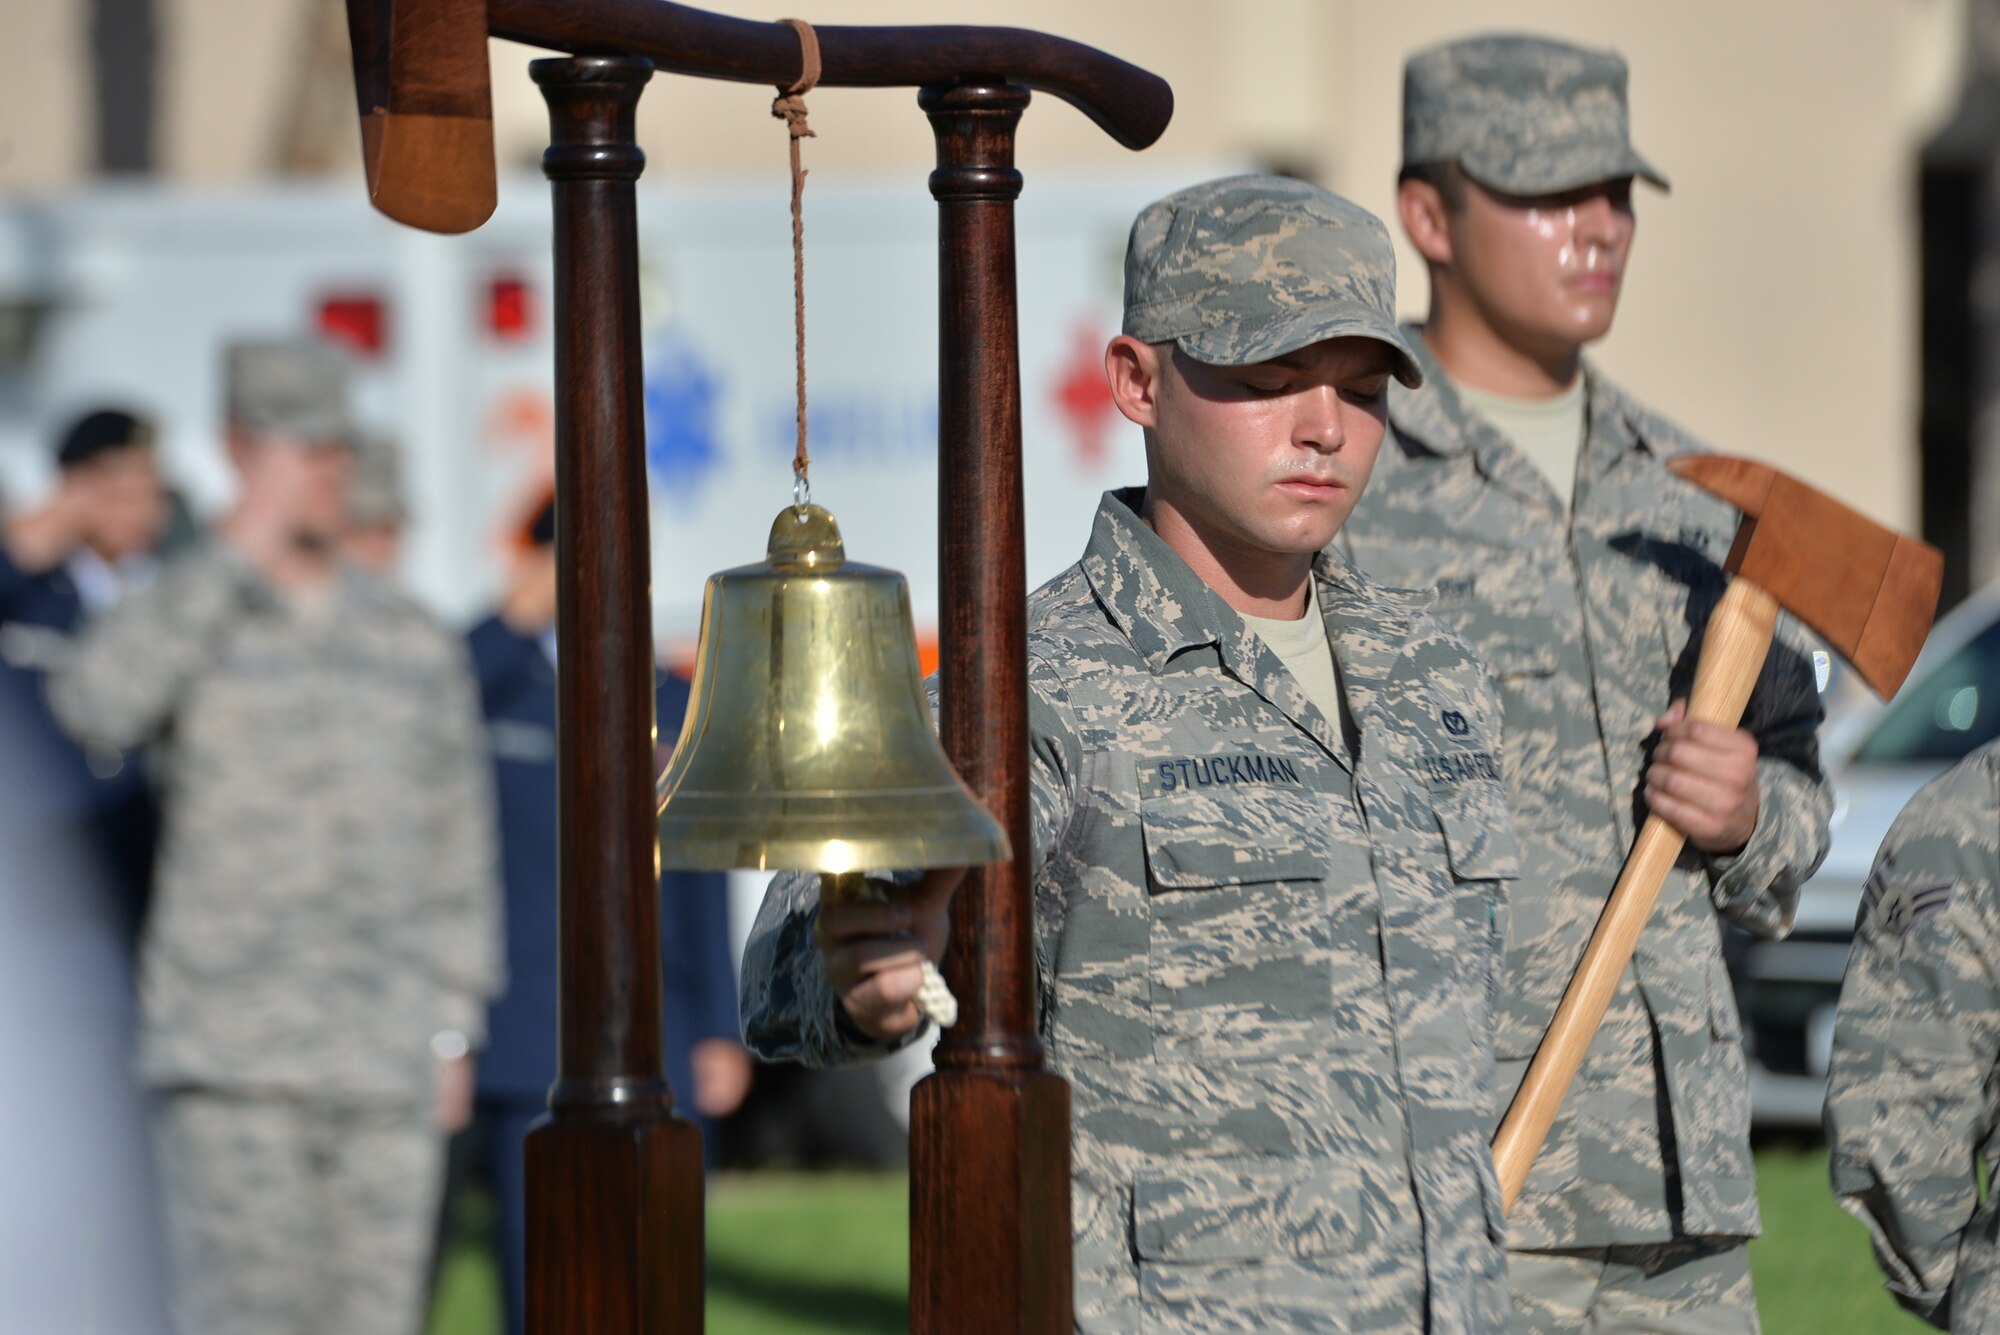 9/11 remembrance ceremony held at Nellis